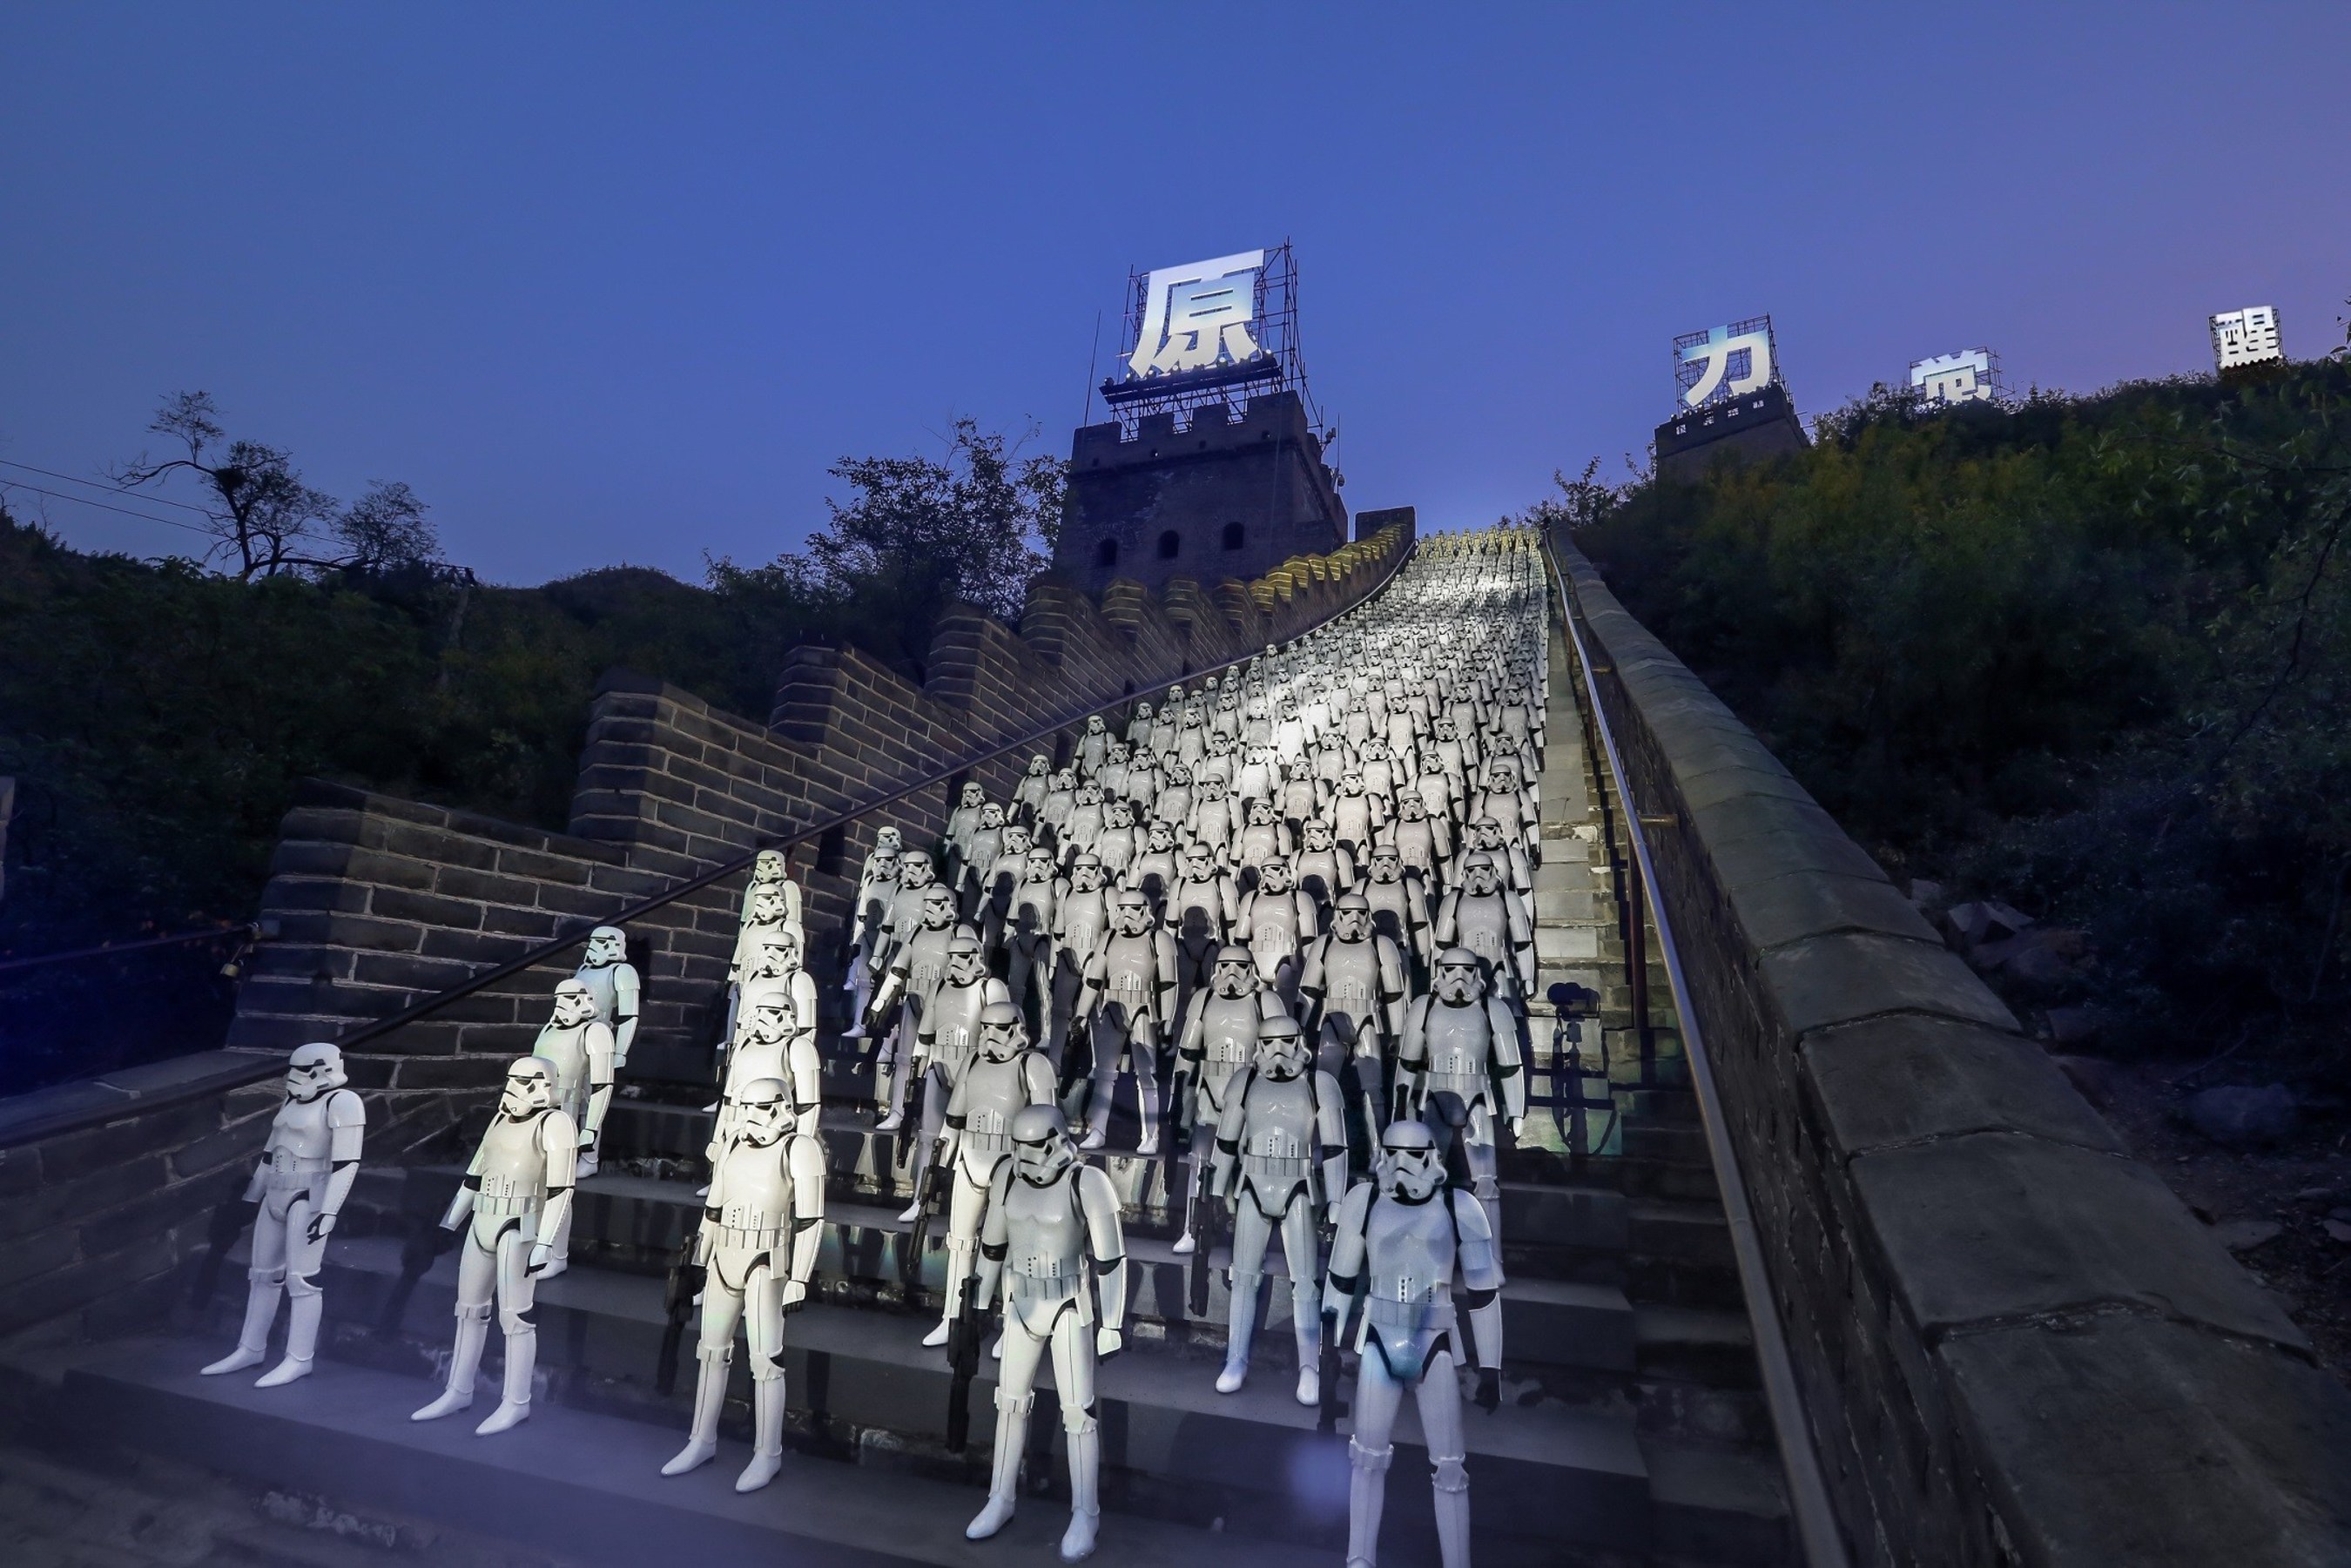 Star Wars: The Force Awakens on the Great Wall